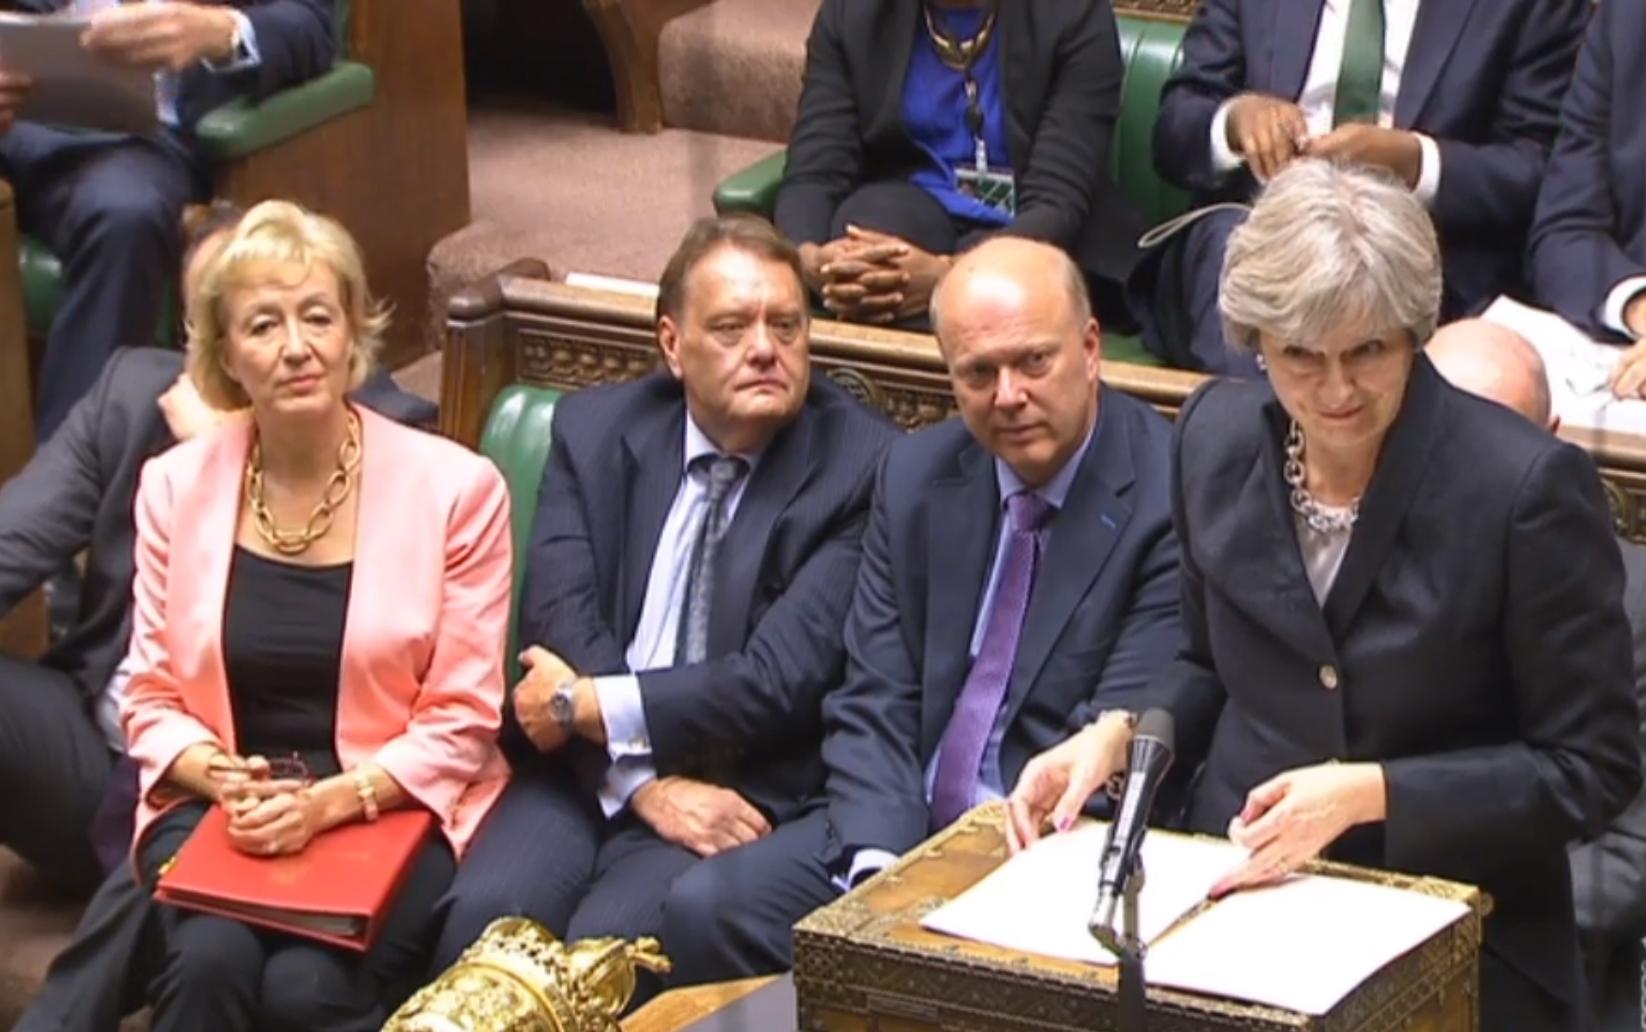 Theresa May updated the Commons on Brexit, for the first time since her disastrous conference speech